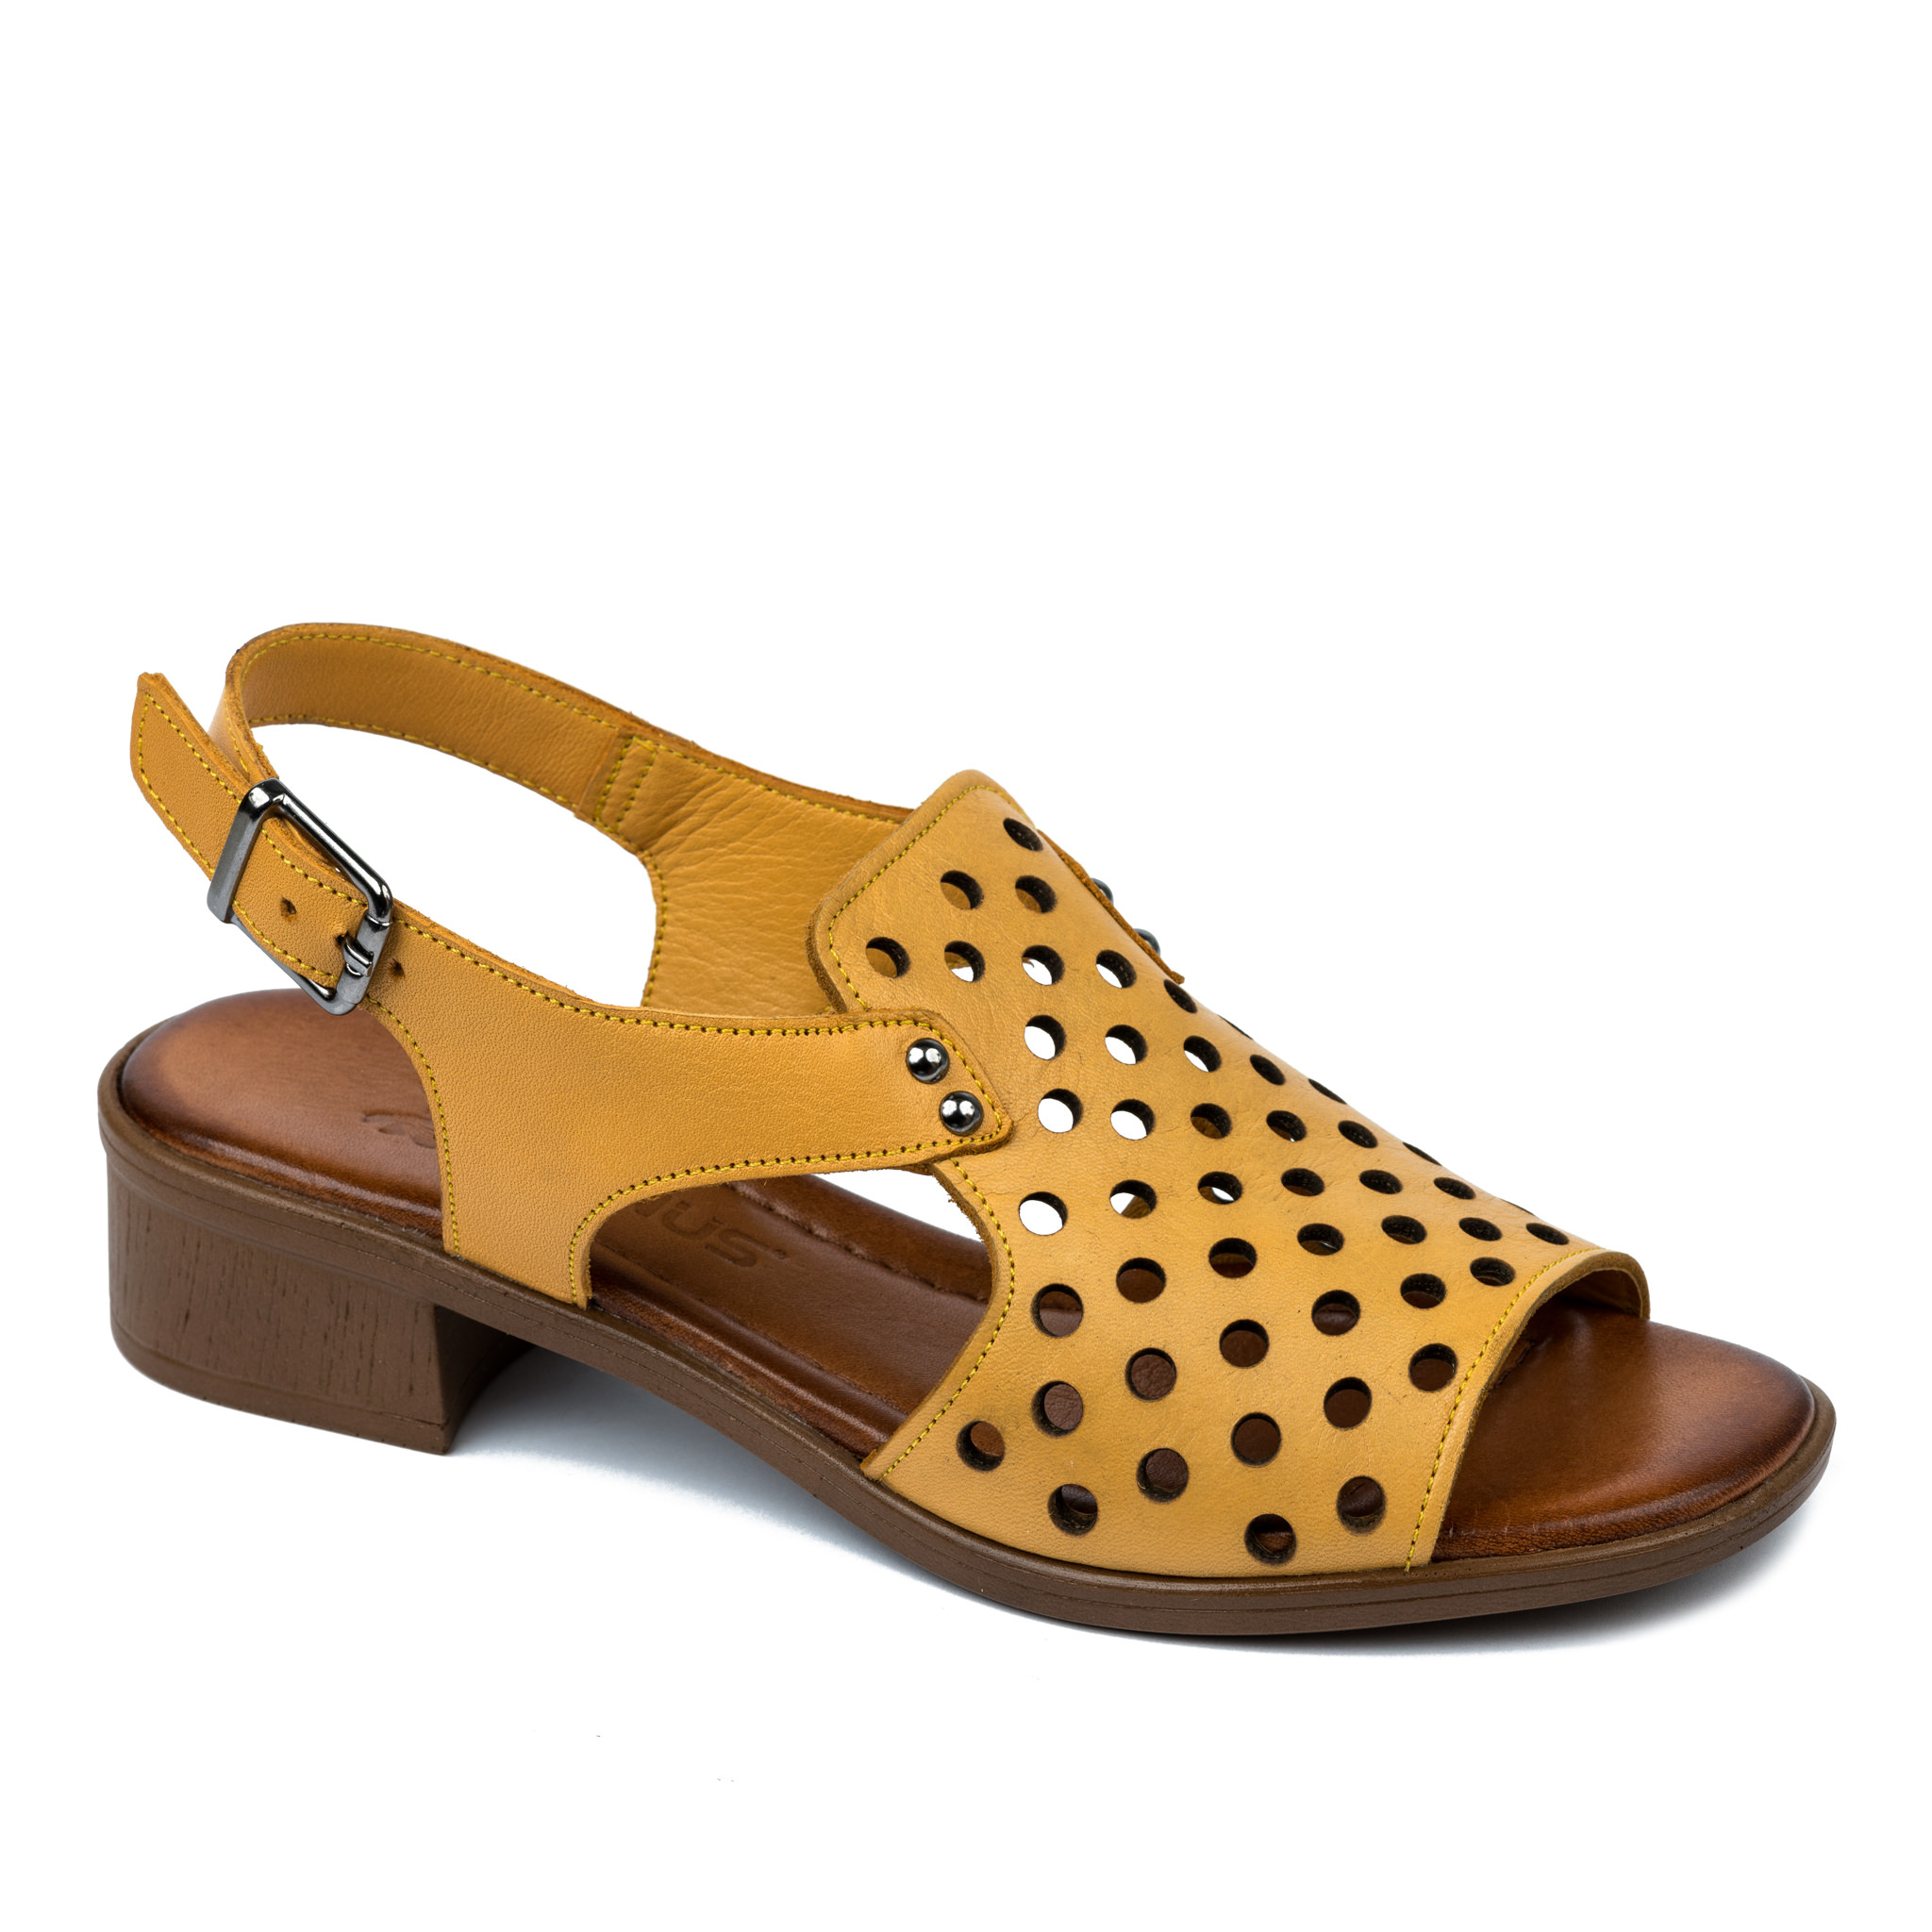 Leather sandals A473 - YELLOW